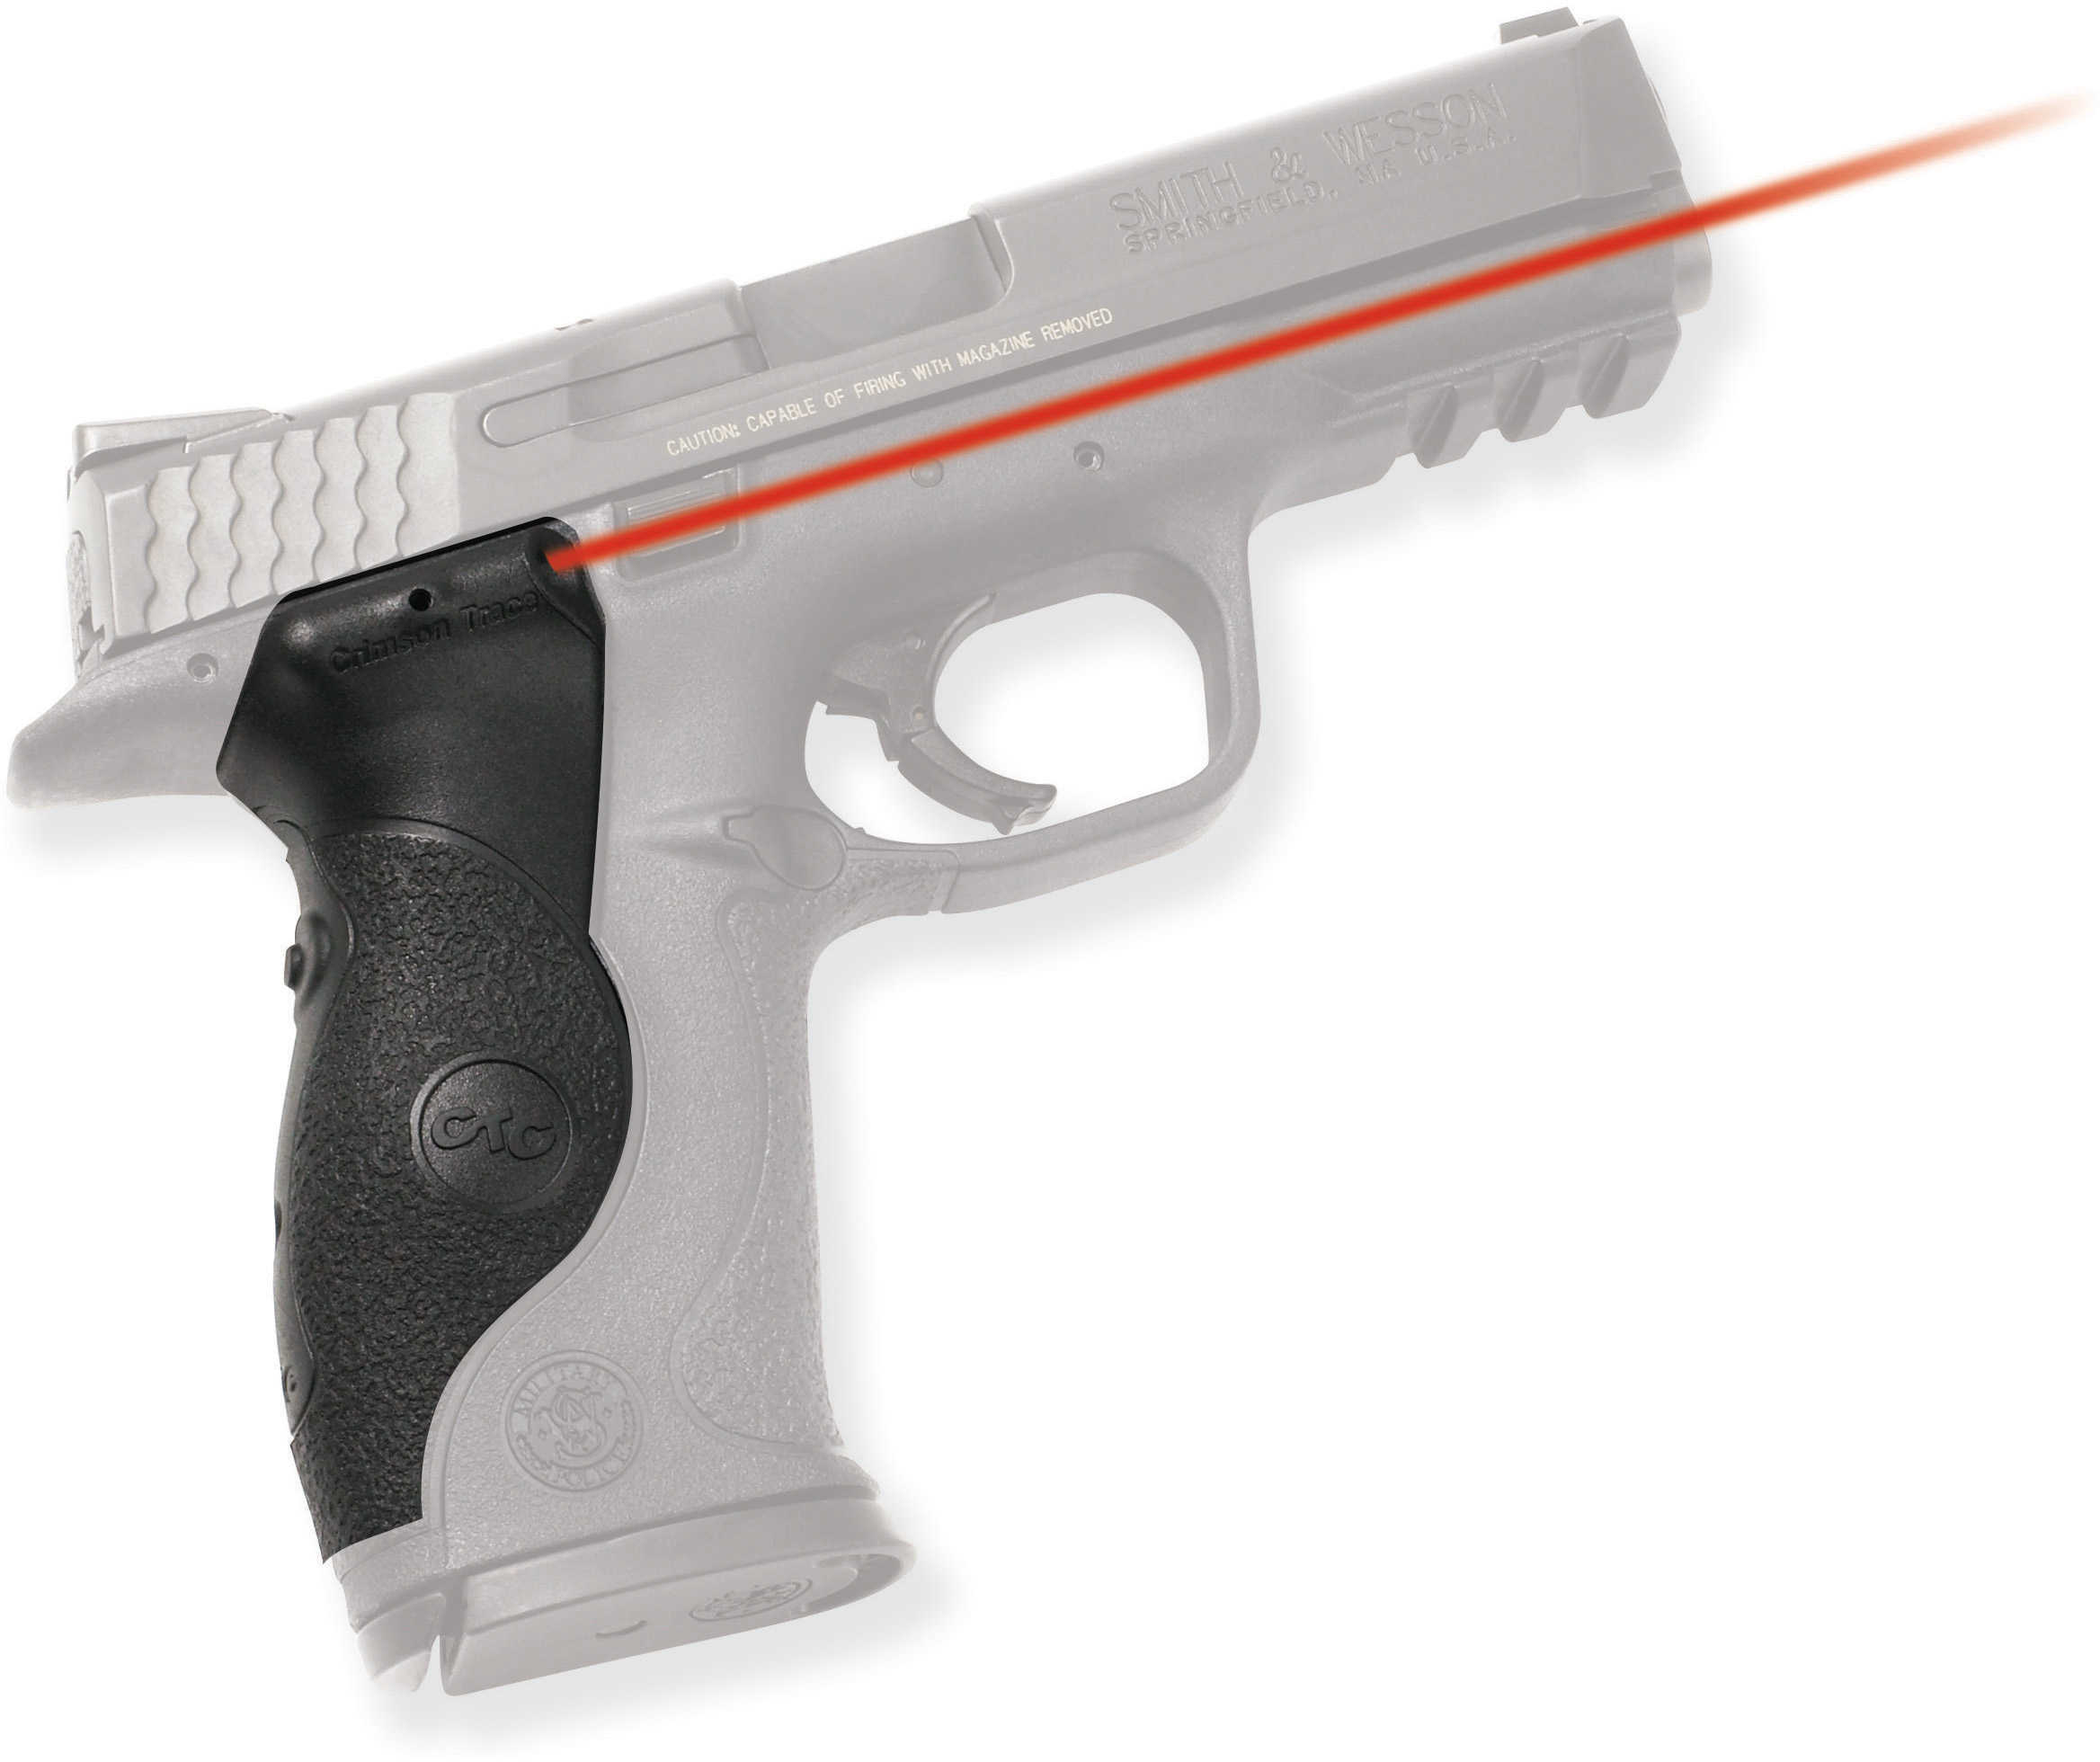 Crimson Trace Smith and Wesson M&P, Full, Polymer Overmold, Rear Activation, Clam Pack Md: LG-660-S